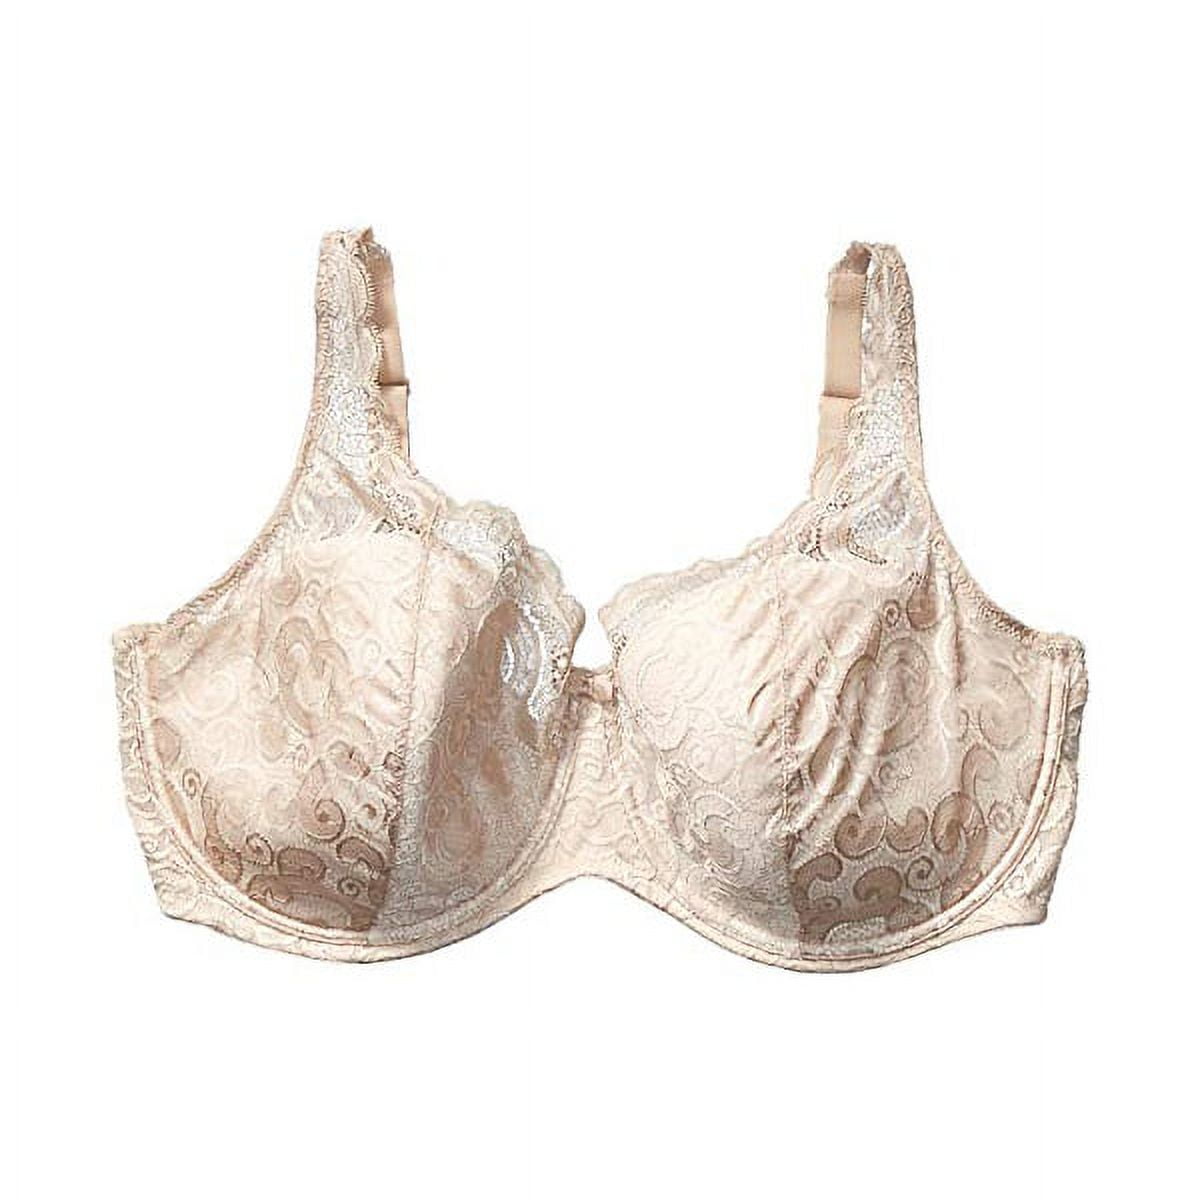 Playtex Love My Curves Thin Foam with Lace Underwire Bra (US4514)  44DDD/White/Nude at  Women's Clothing store